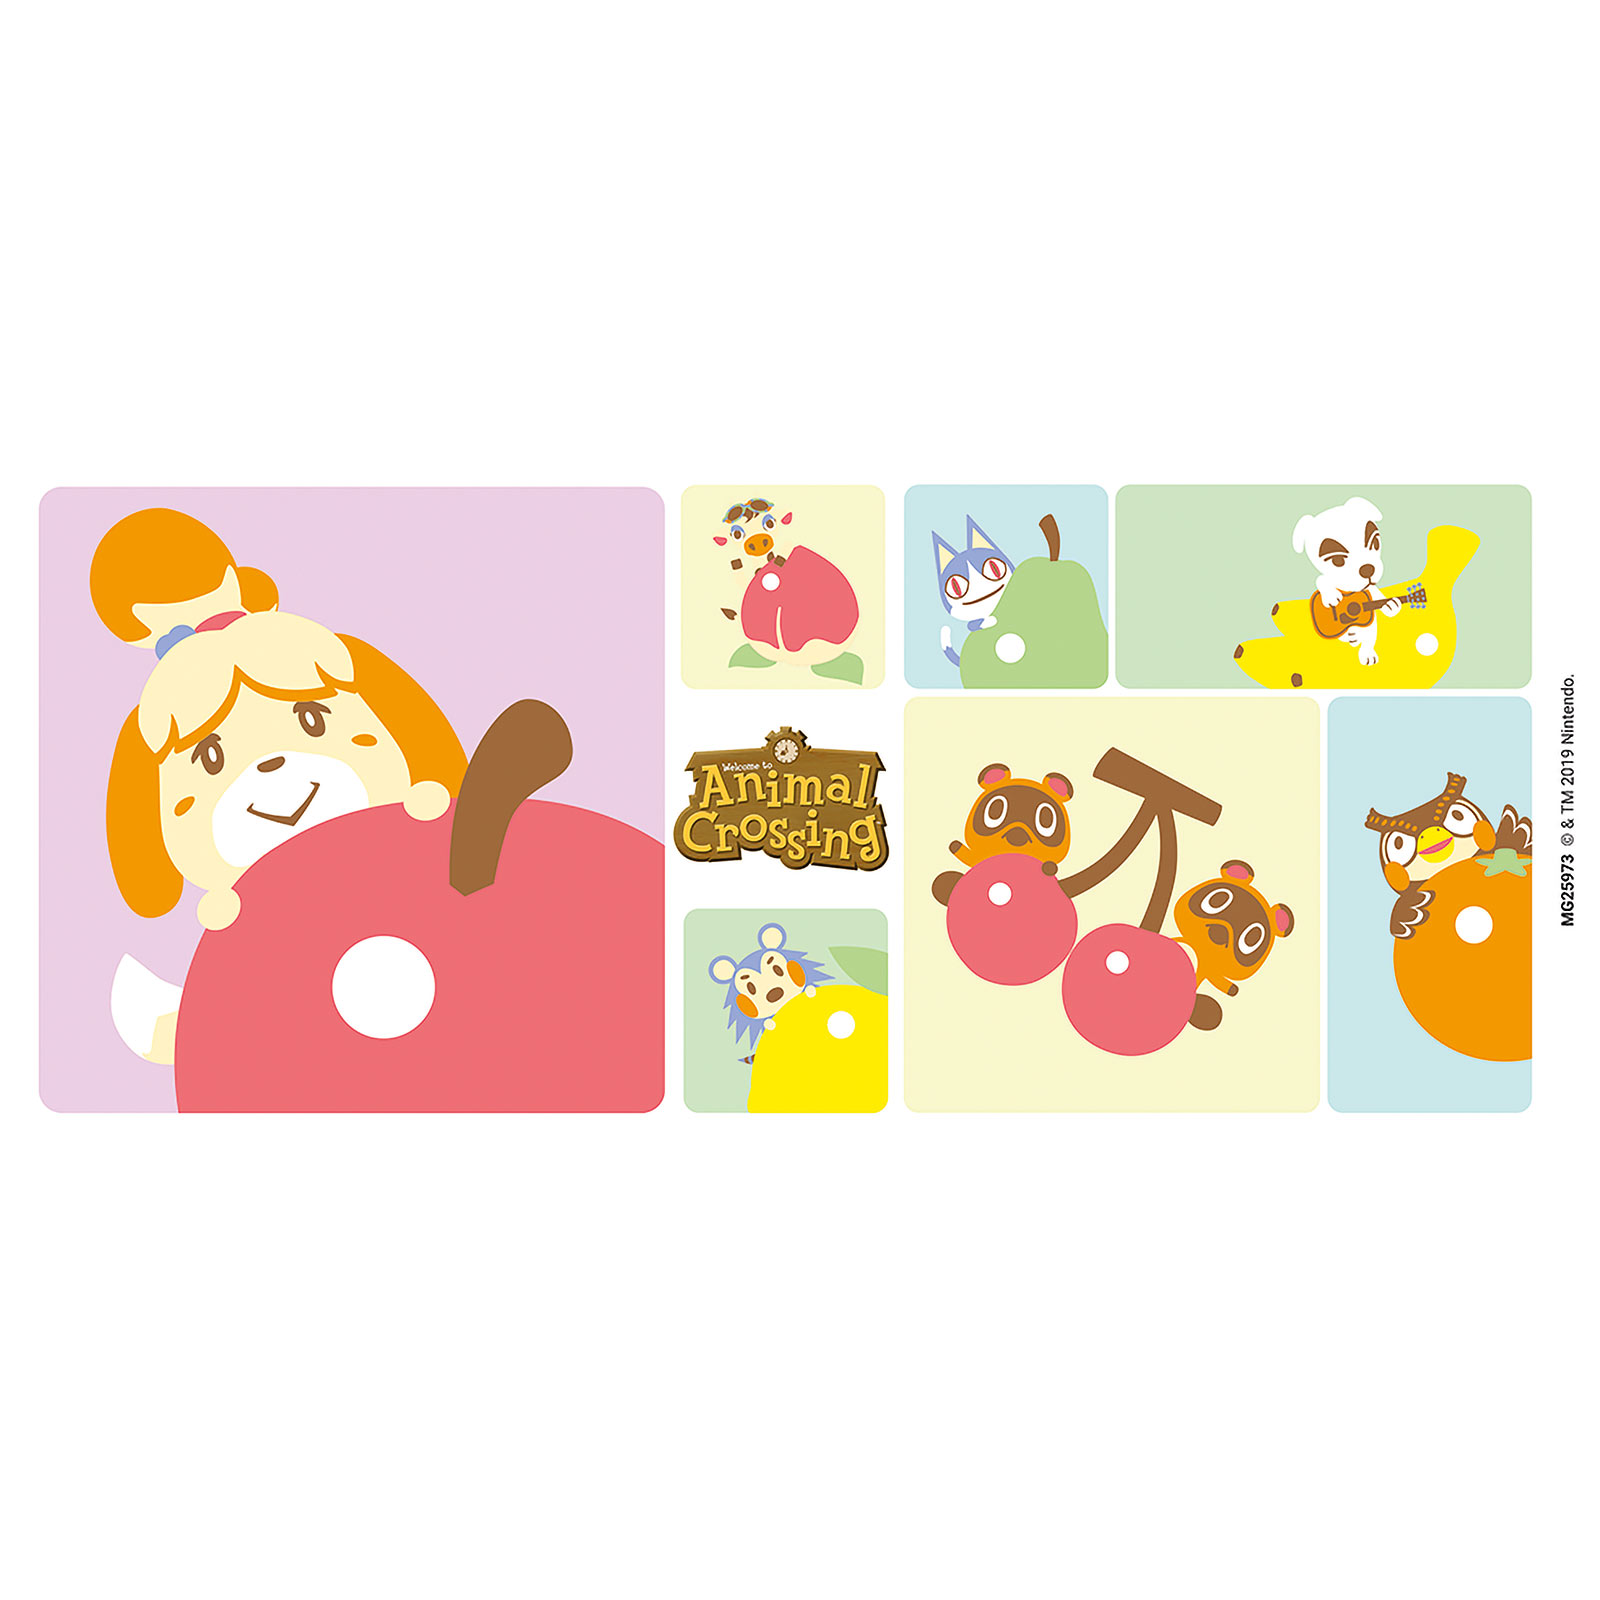 Animal Crossing - Tasse Collage de Personnages